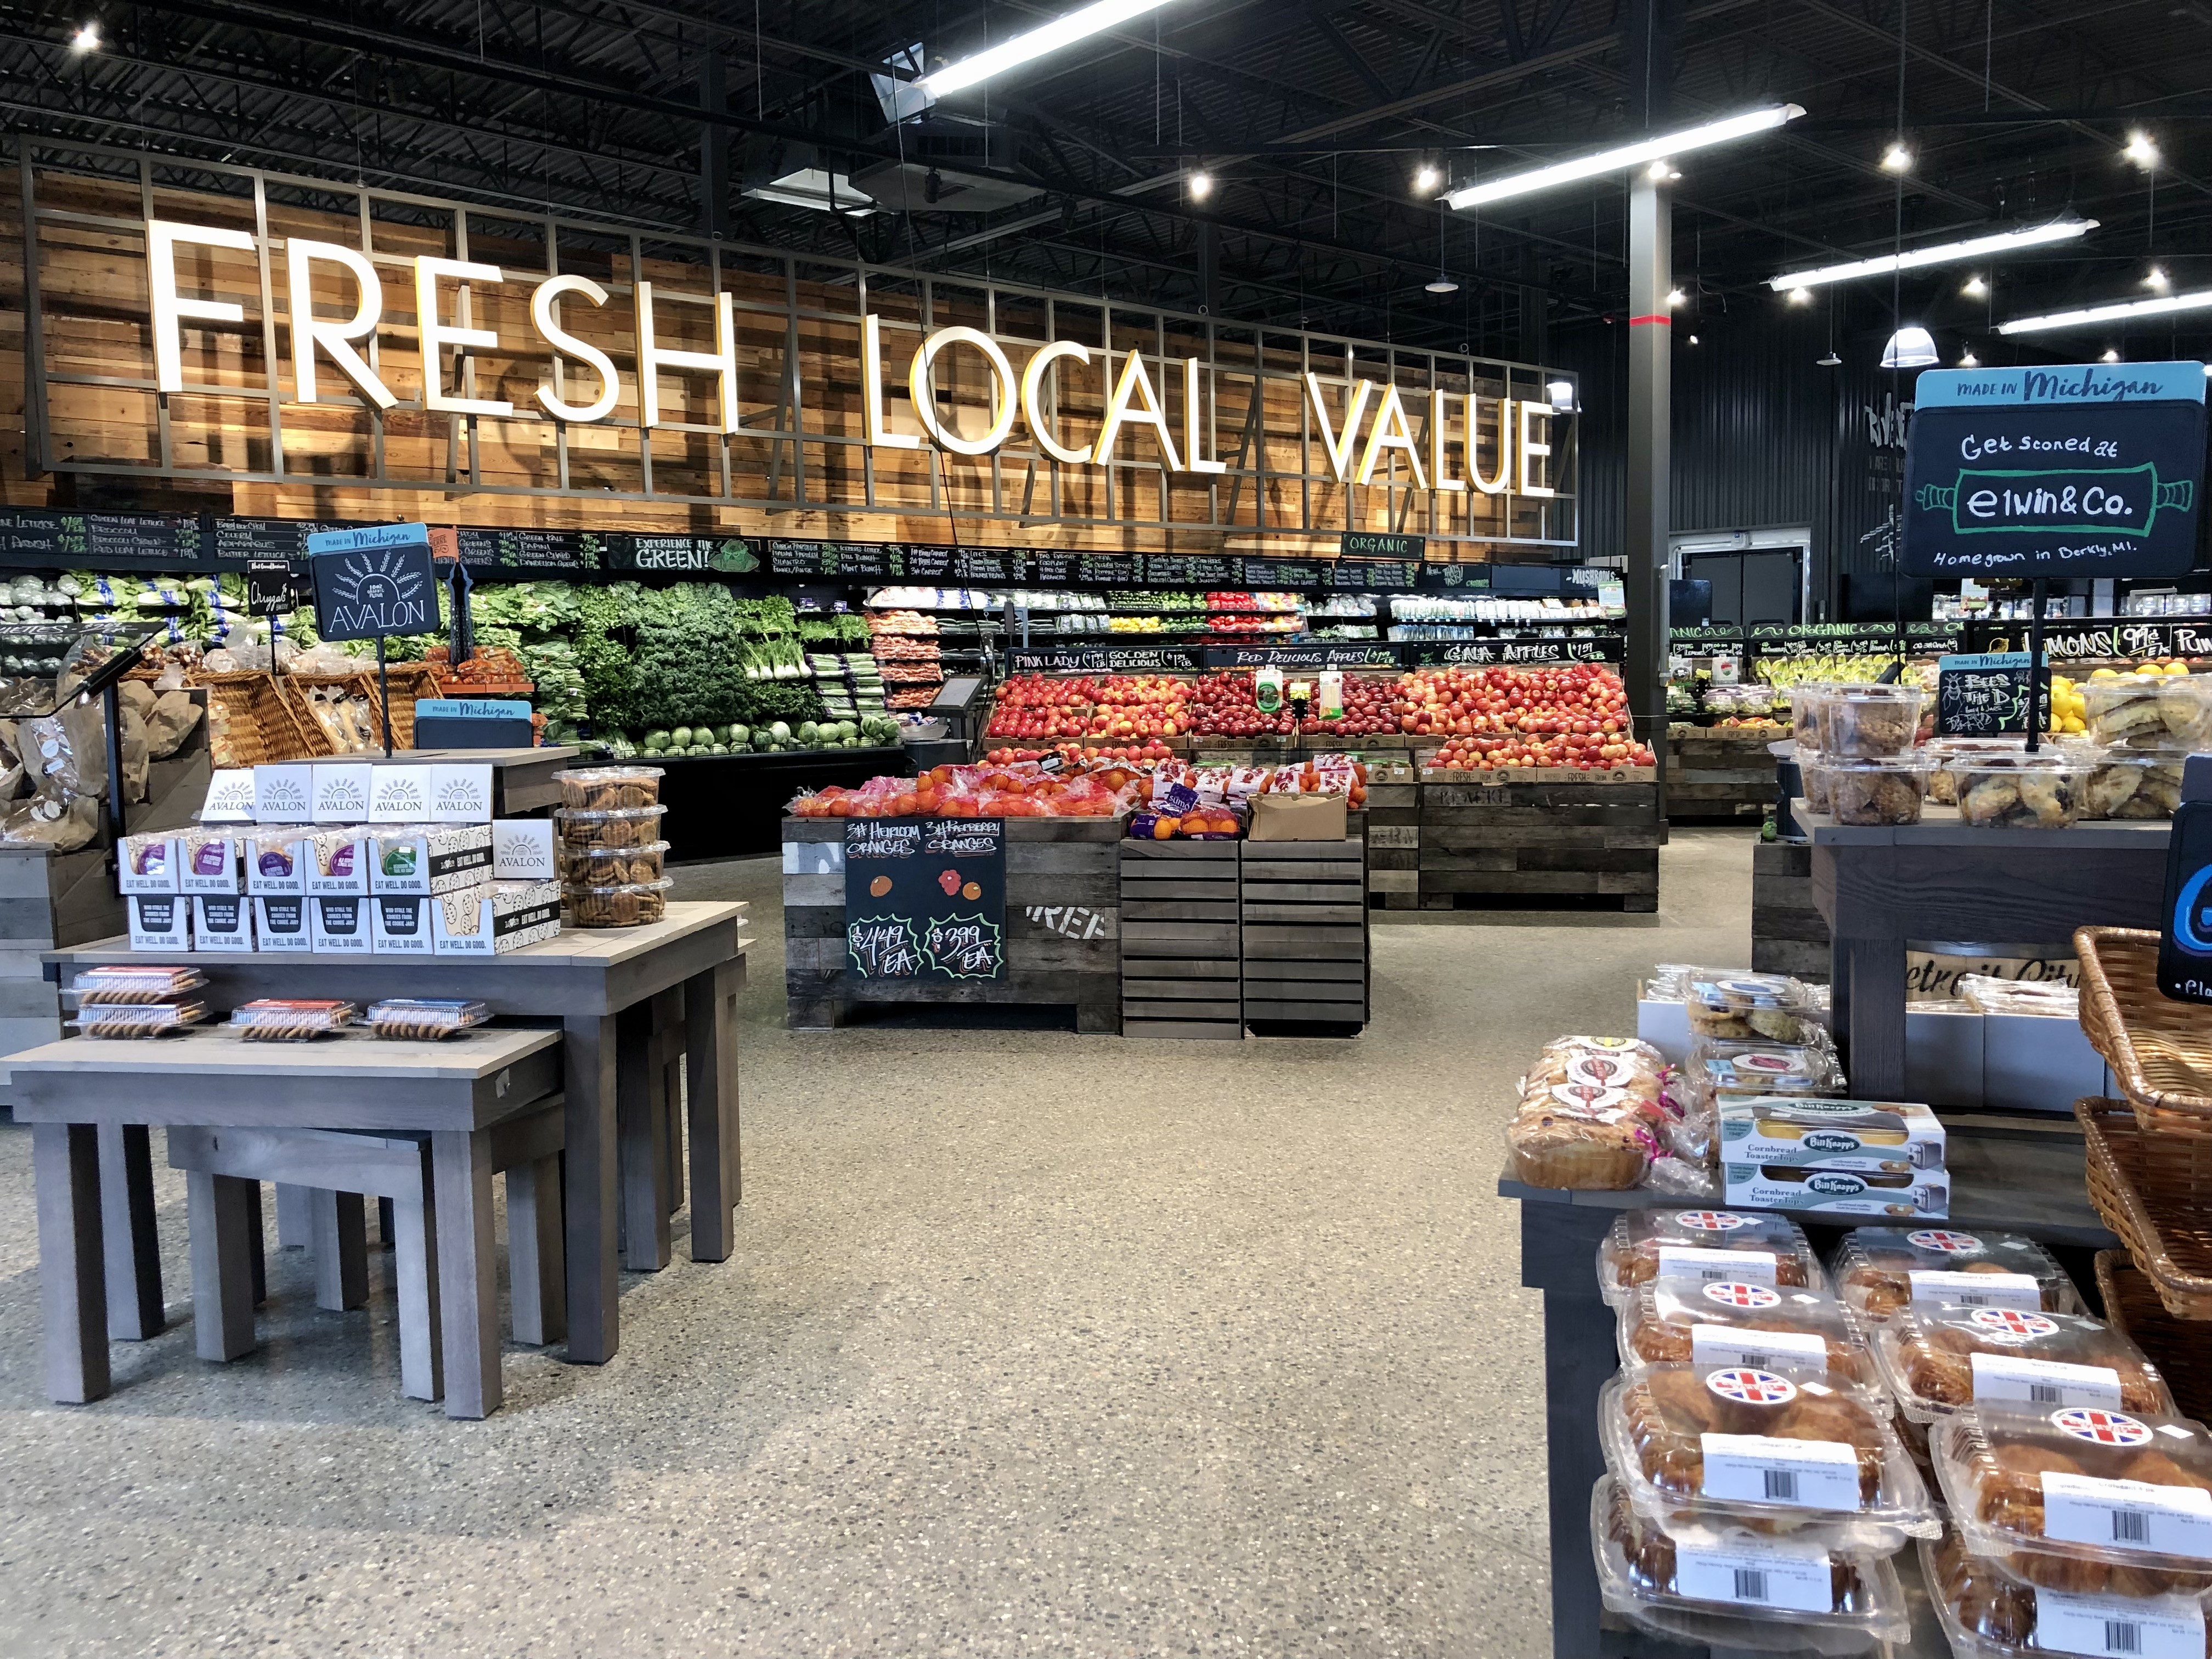 Tour of 4 grocery stores in Detroit